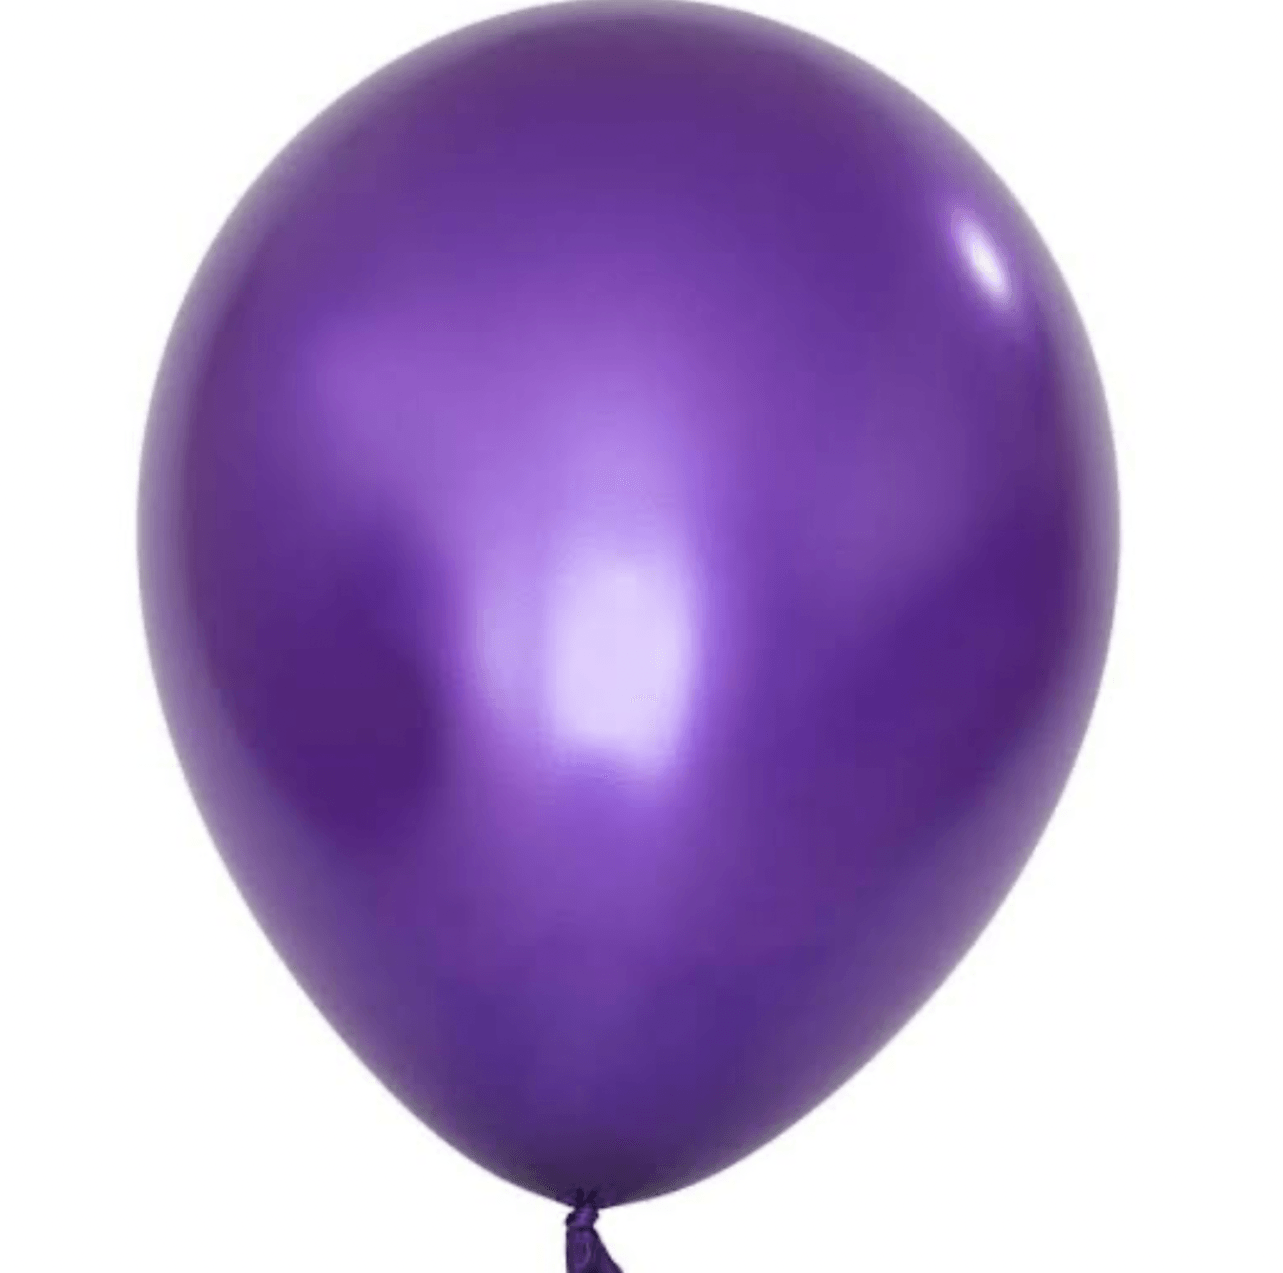 Helium Balloons (Pack Of 20) - Expat Life Style